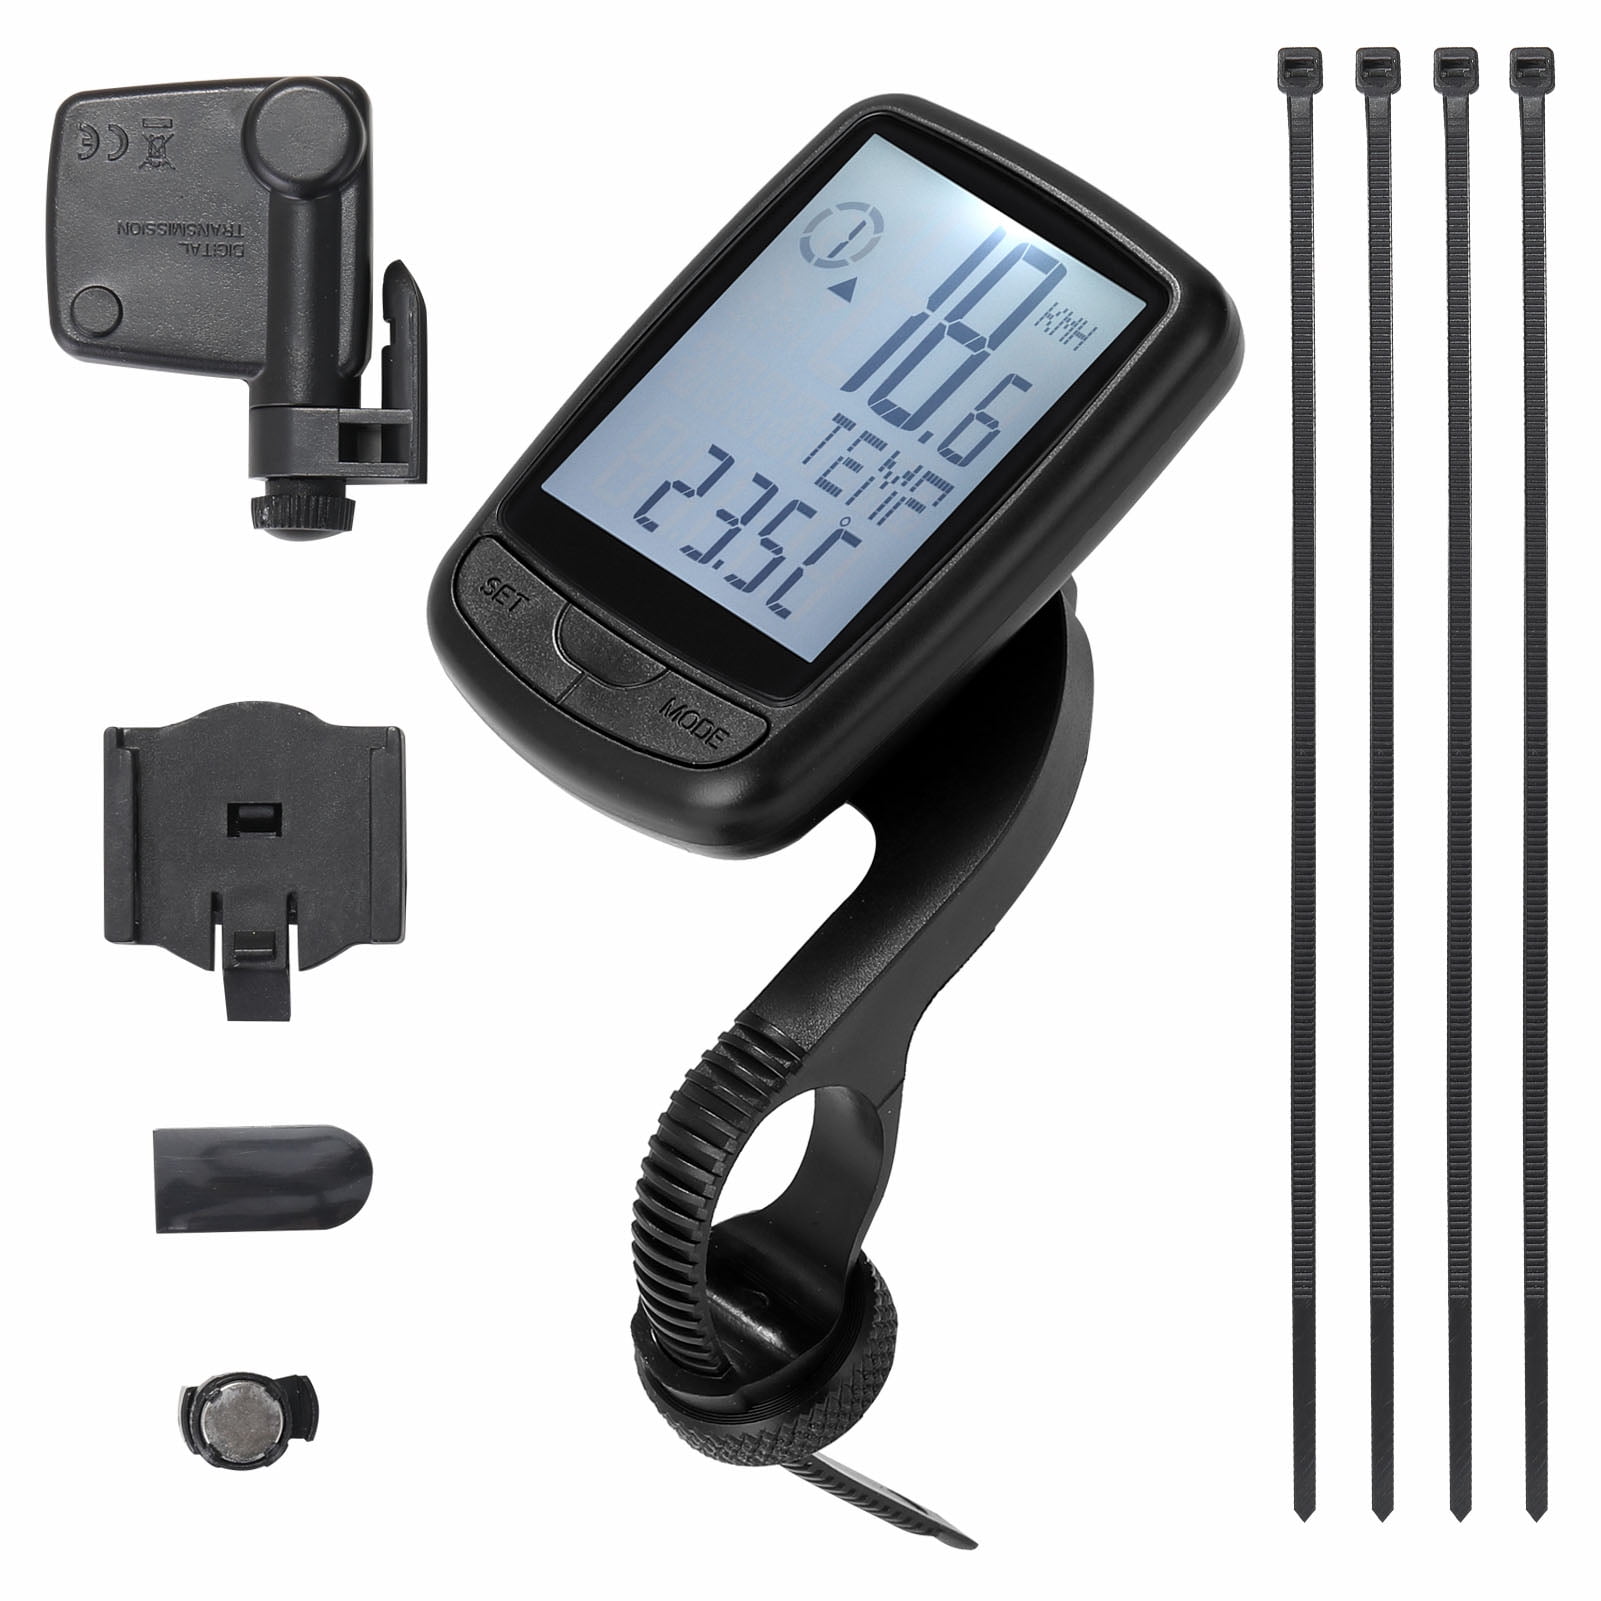 SY Bicycle Speedometer and Odometer Wireless Waterproof Cycle Bike Computer with 